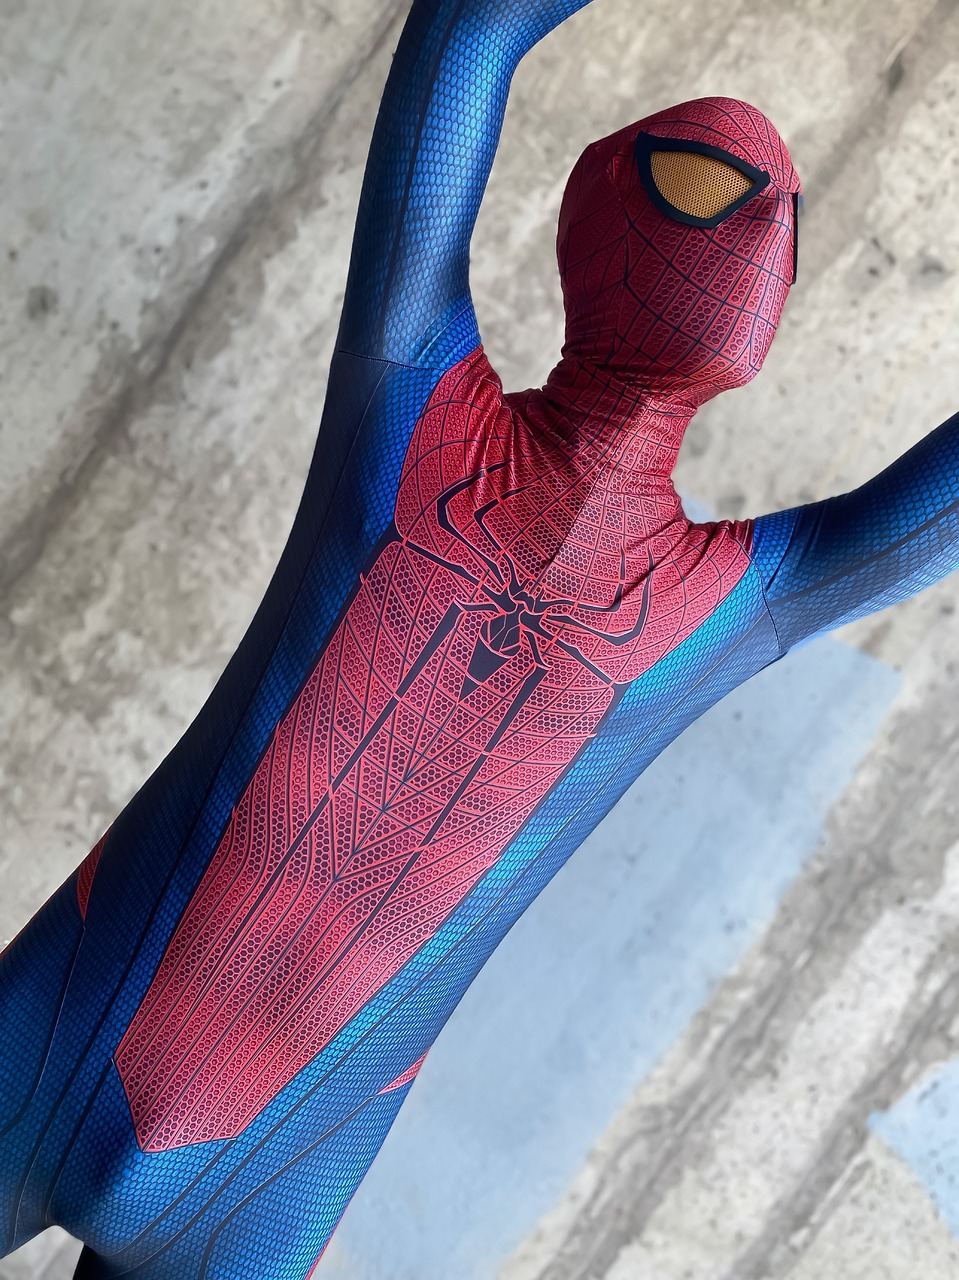 The Incredible Technology Behind Spiderman’s Costume